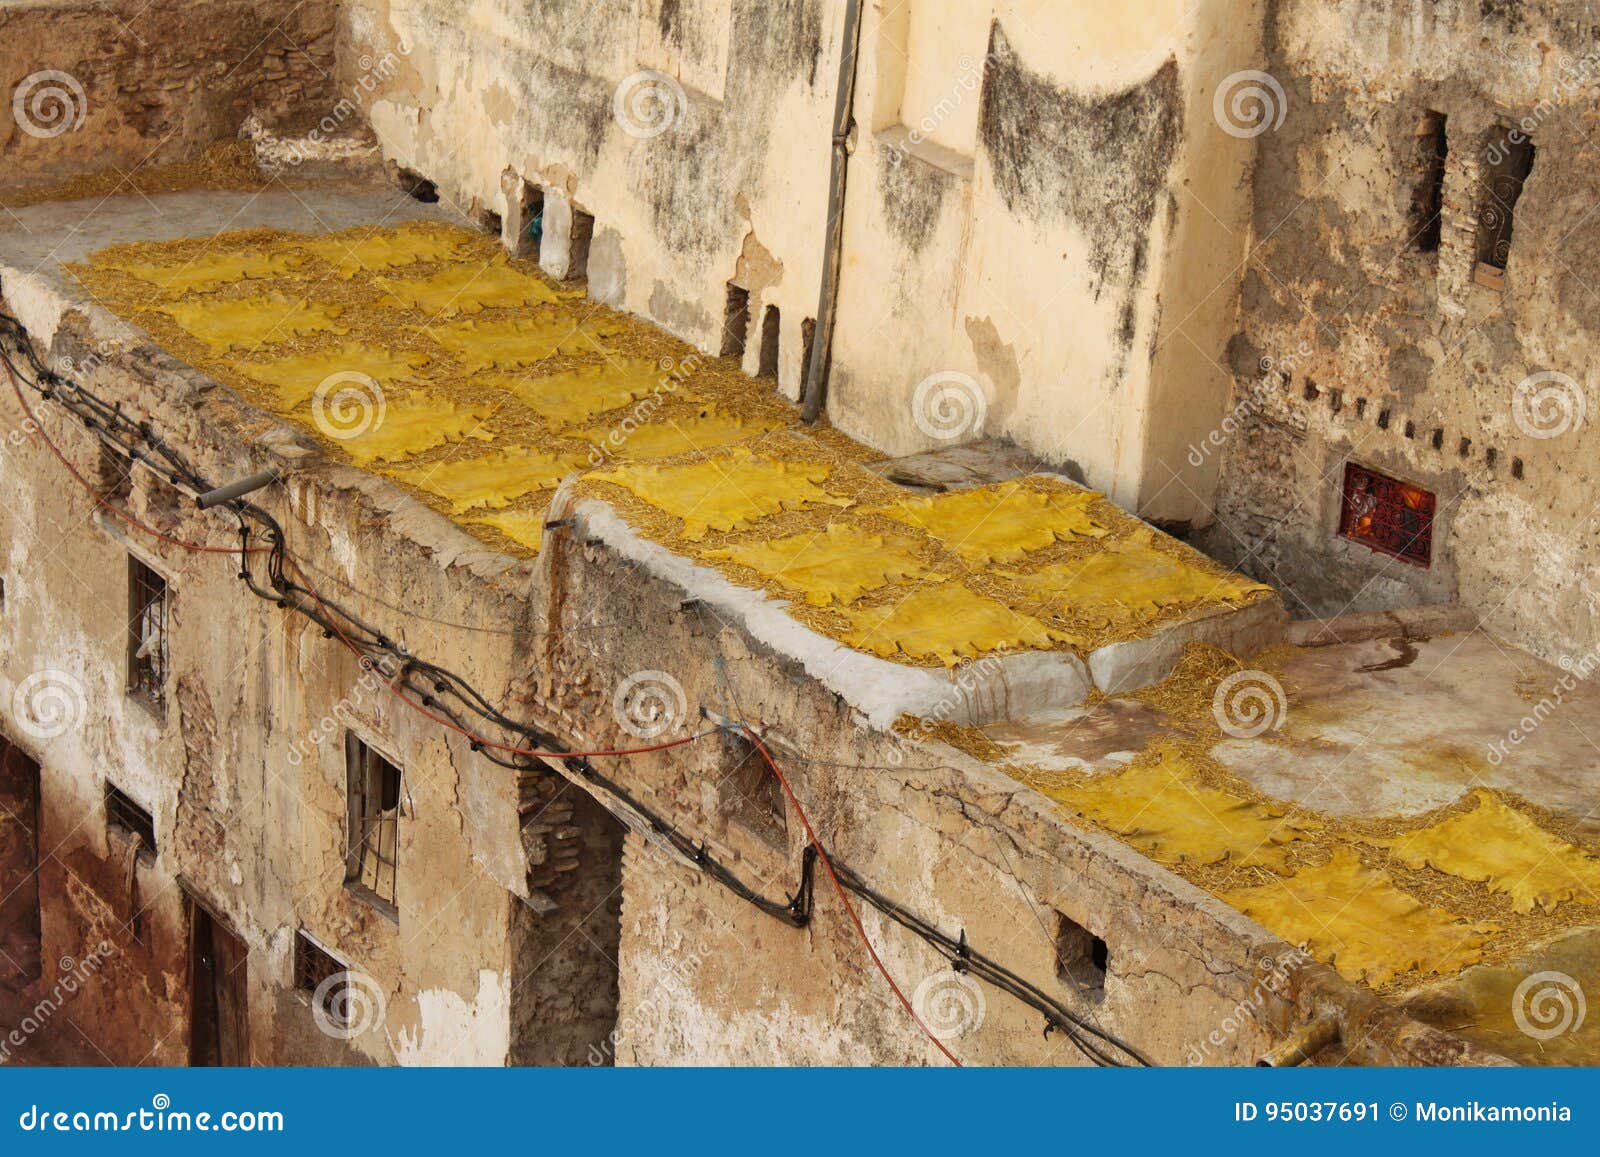 yellow leathers drying on the sun i tannery in fez.